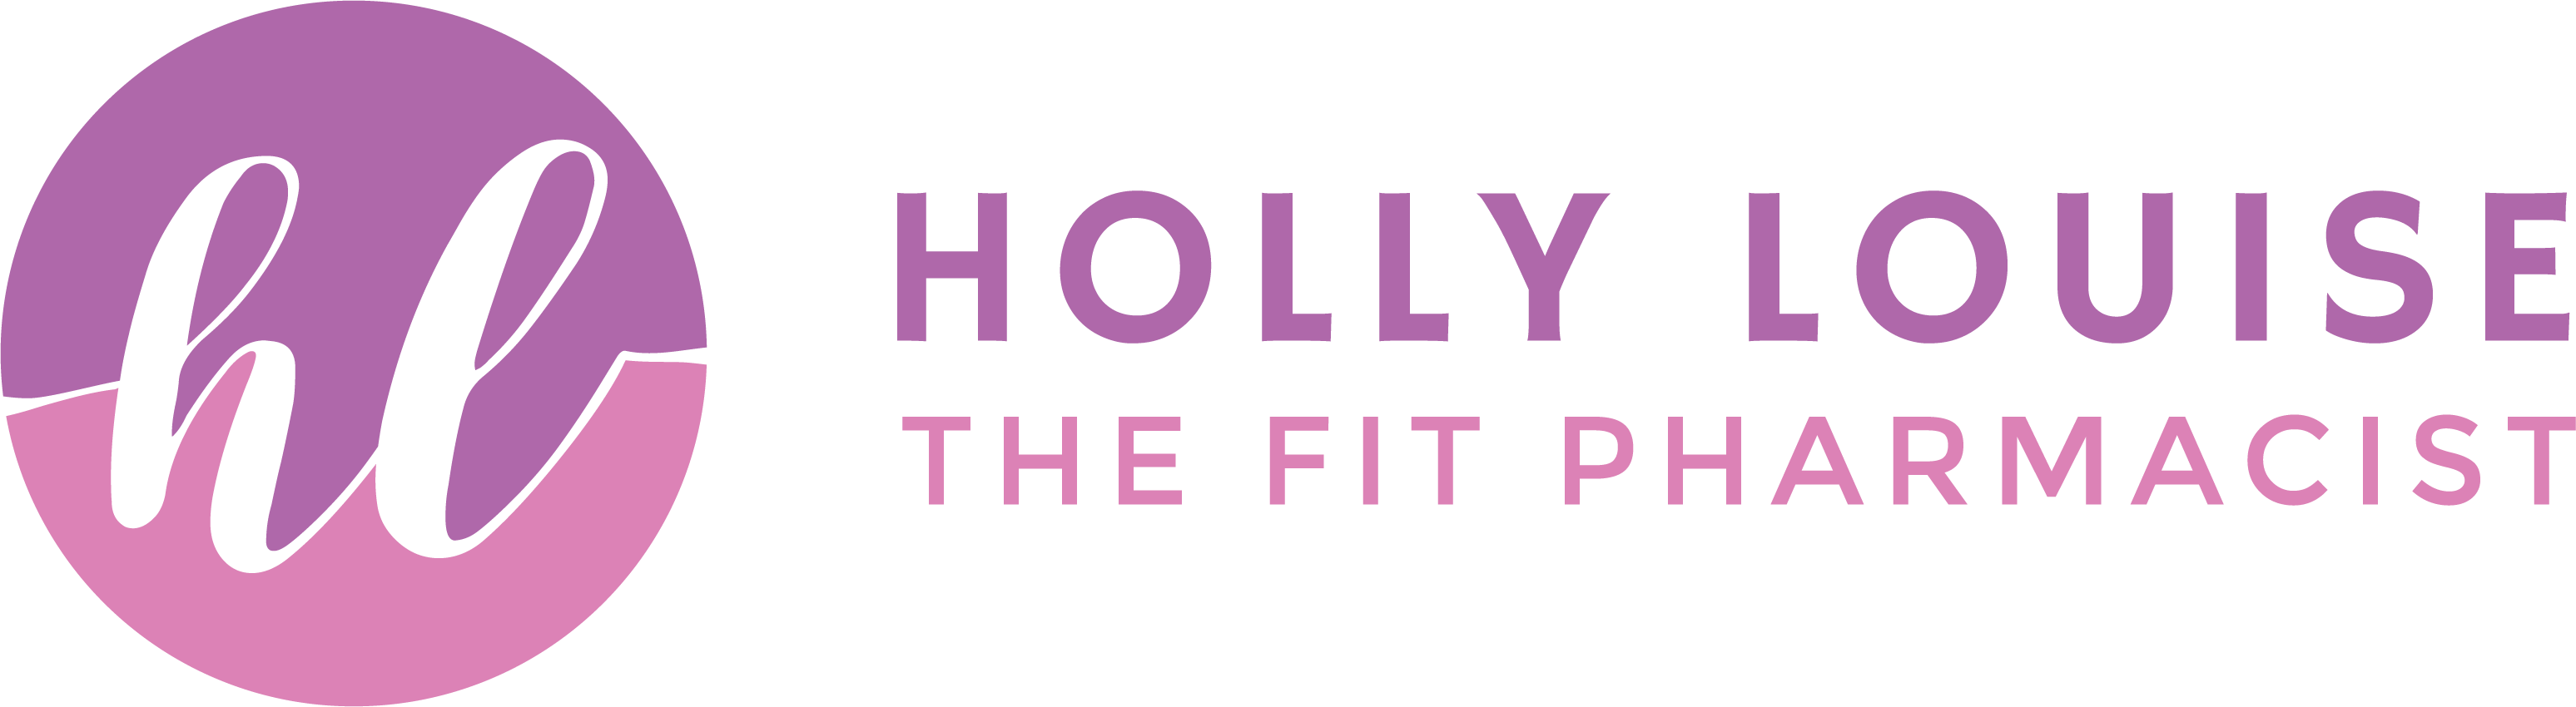 Holly Louise - The Fit Pharmacist